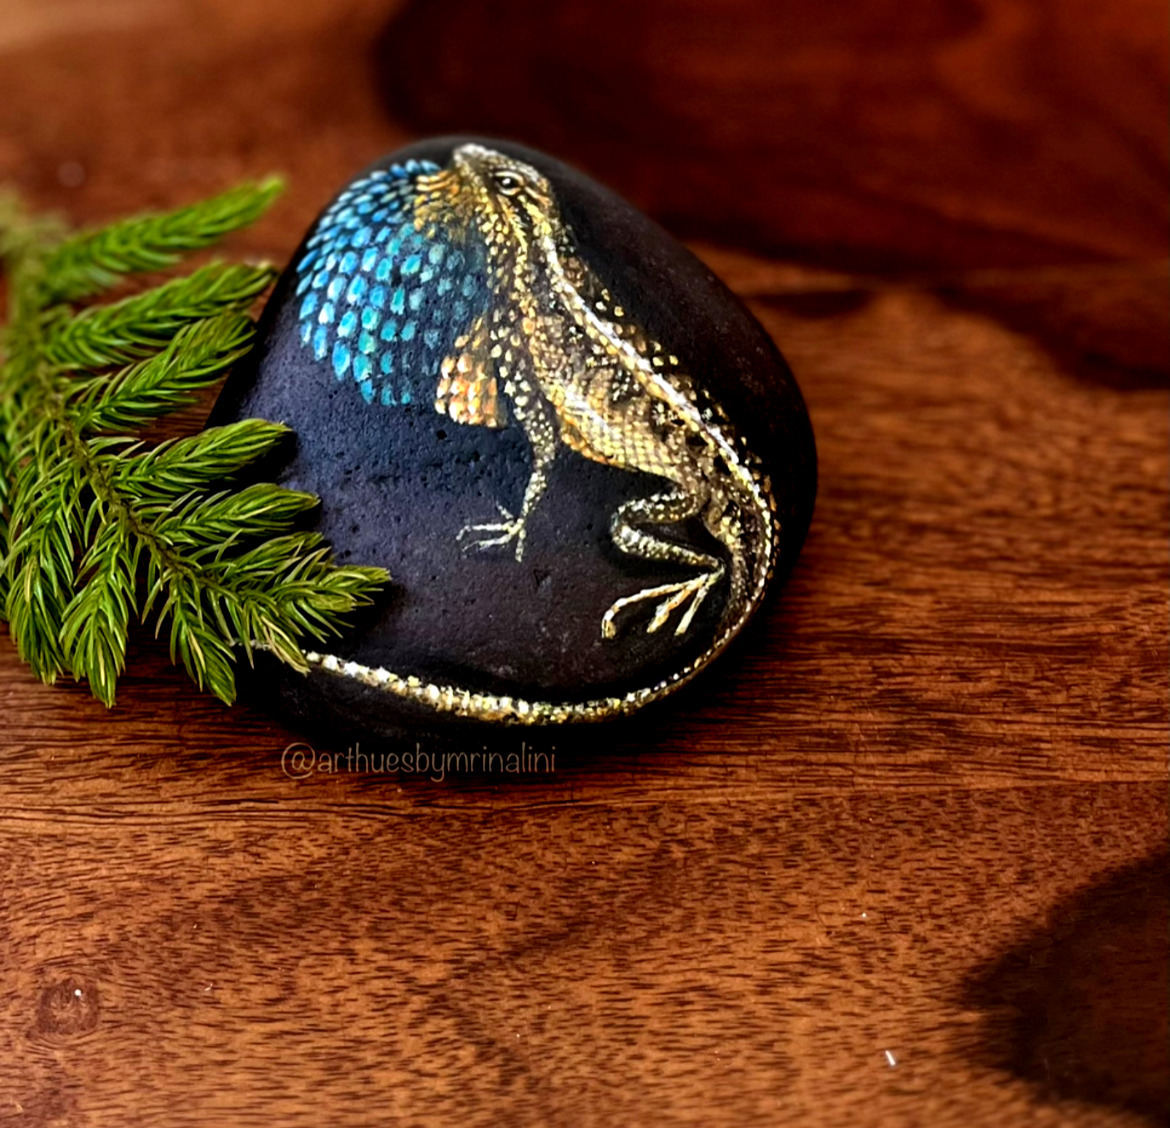 Fan Throated lizard Indian wildlife hand painted stone paperweight